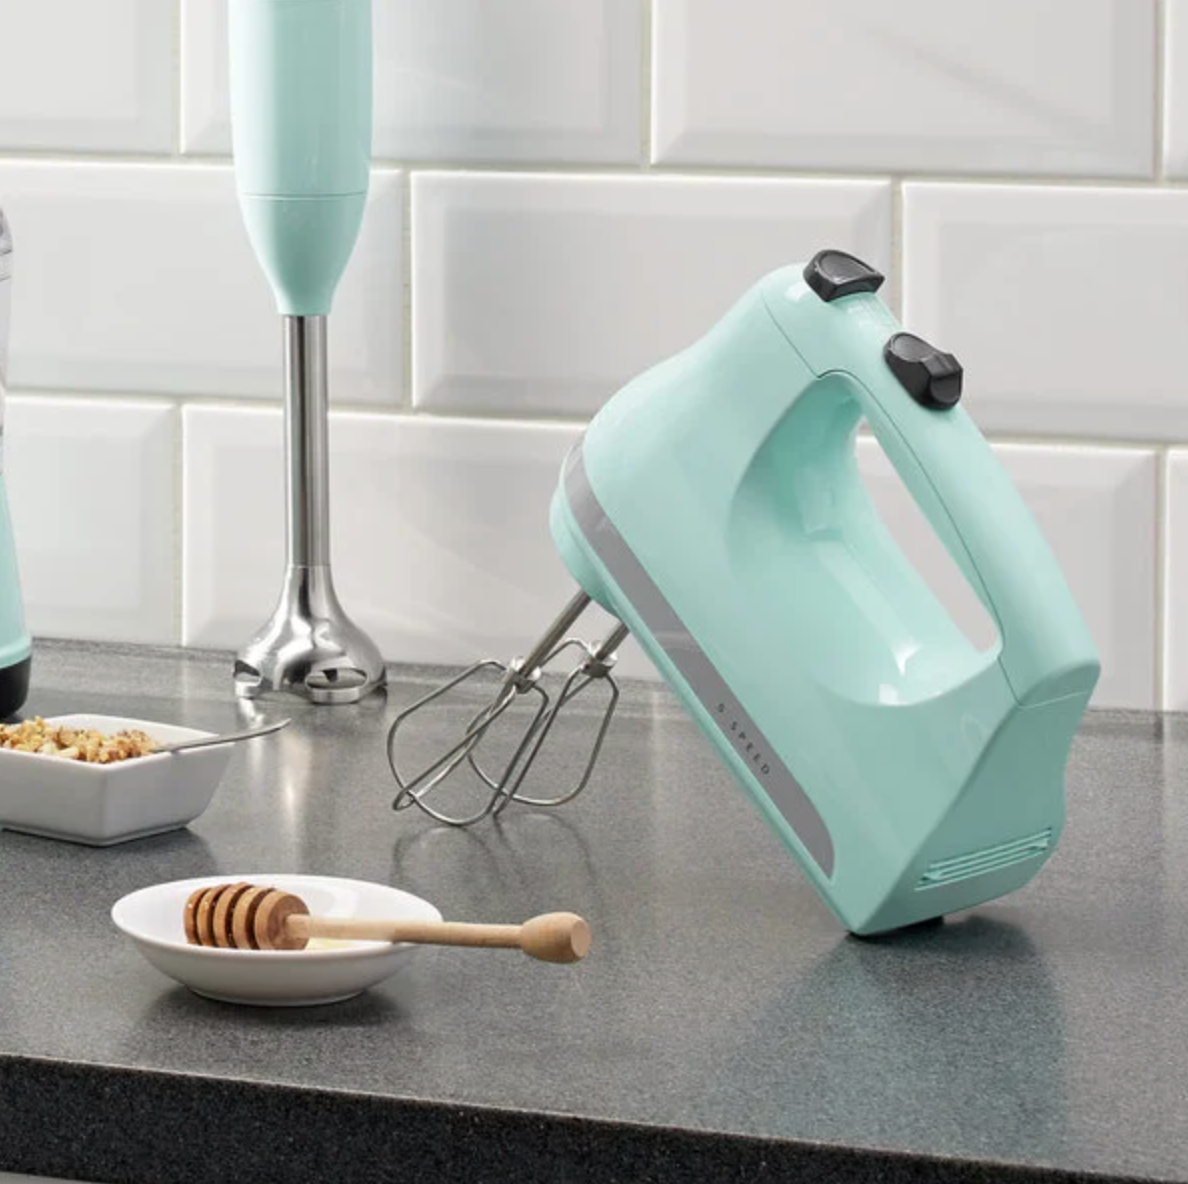 KitchenAid's 9-speed hand mixer is on sale for up to 40% off on